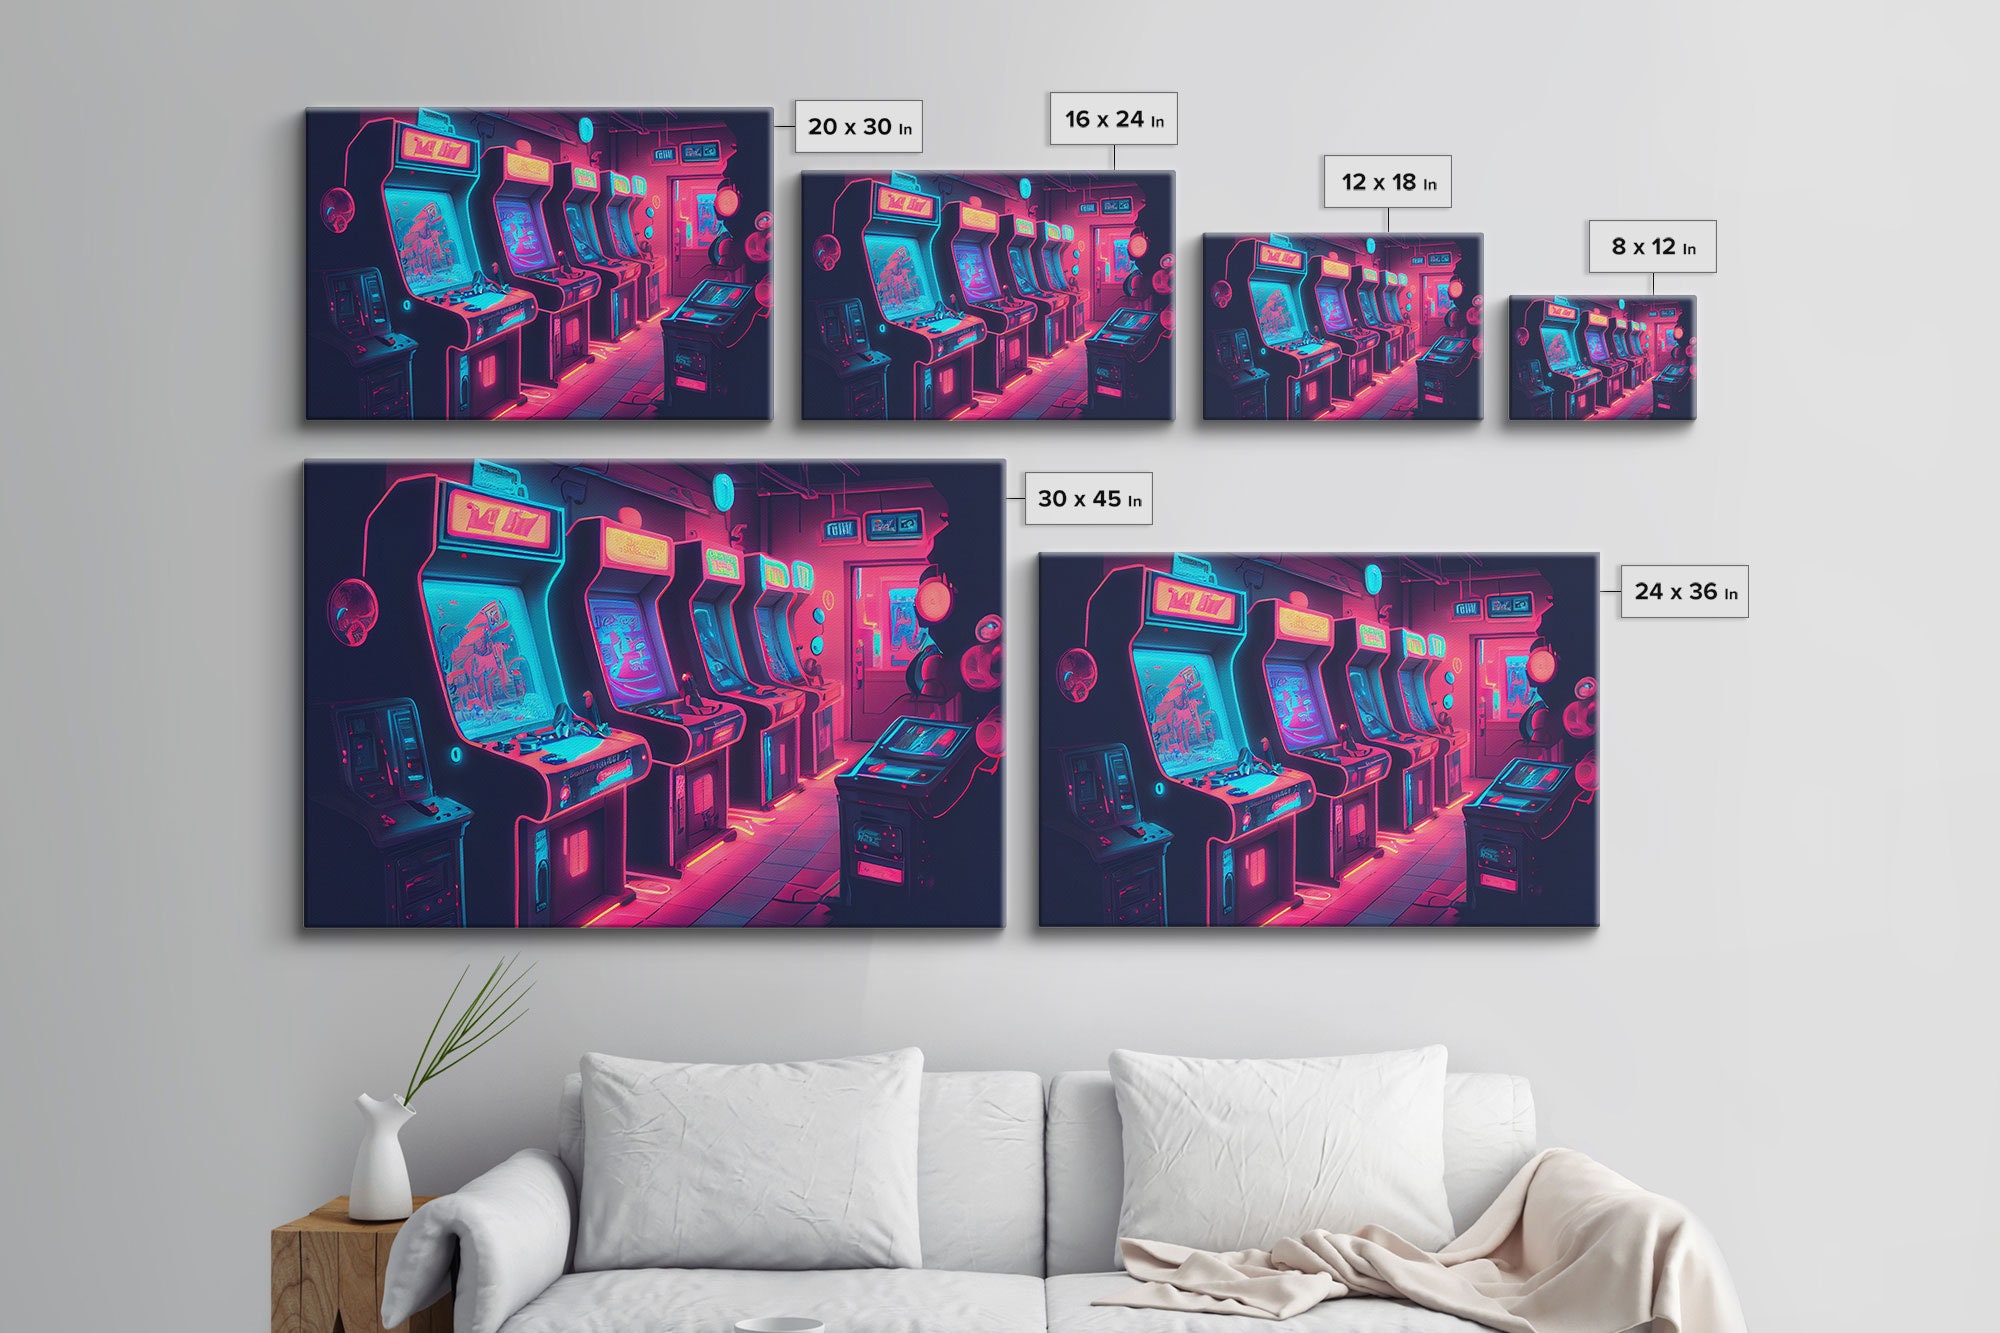 Wall Mural Arcade Machines - A Multi-Colored Gaming Room in Neon